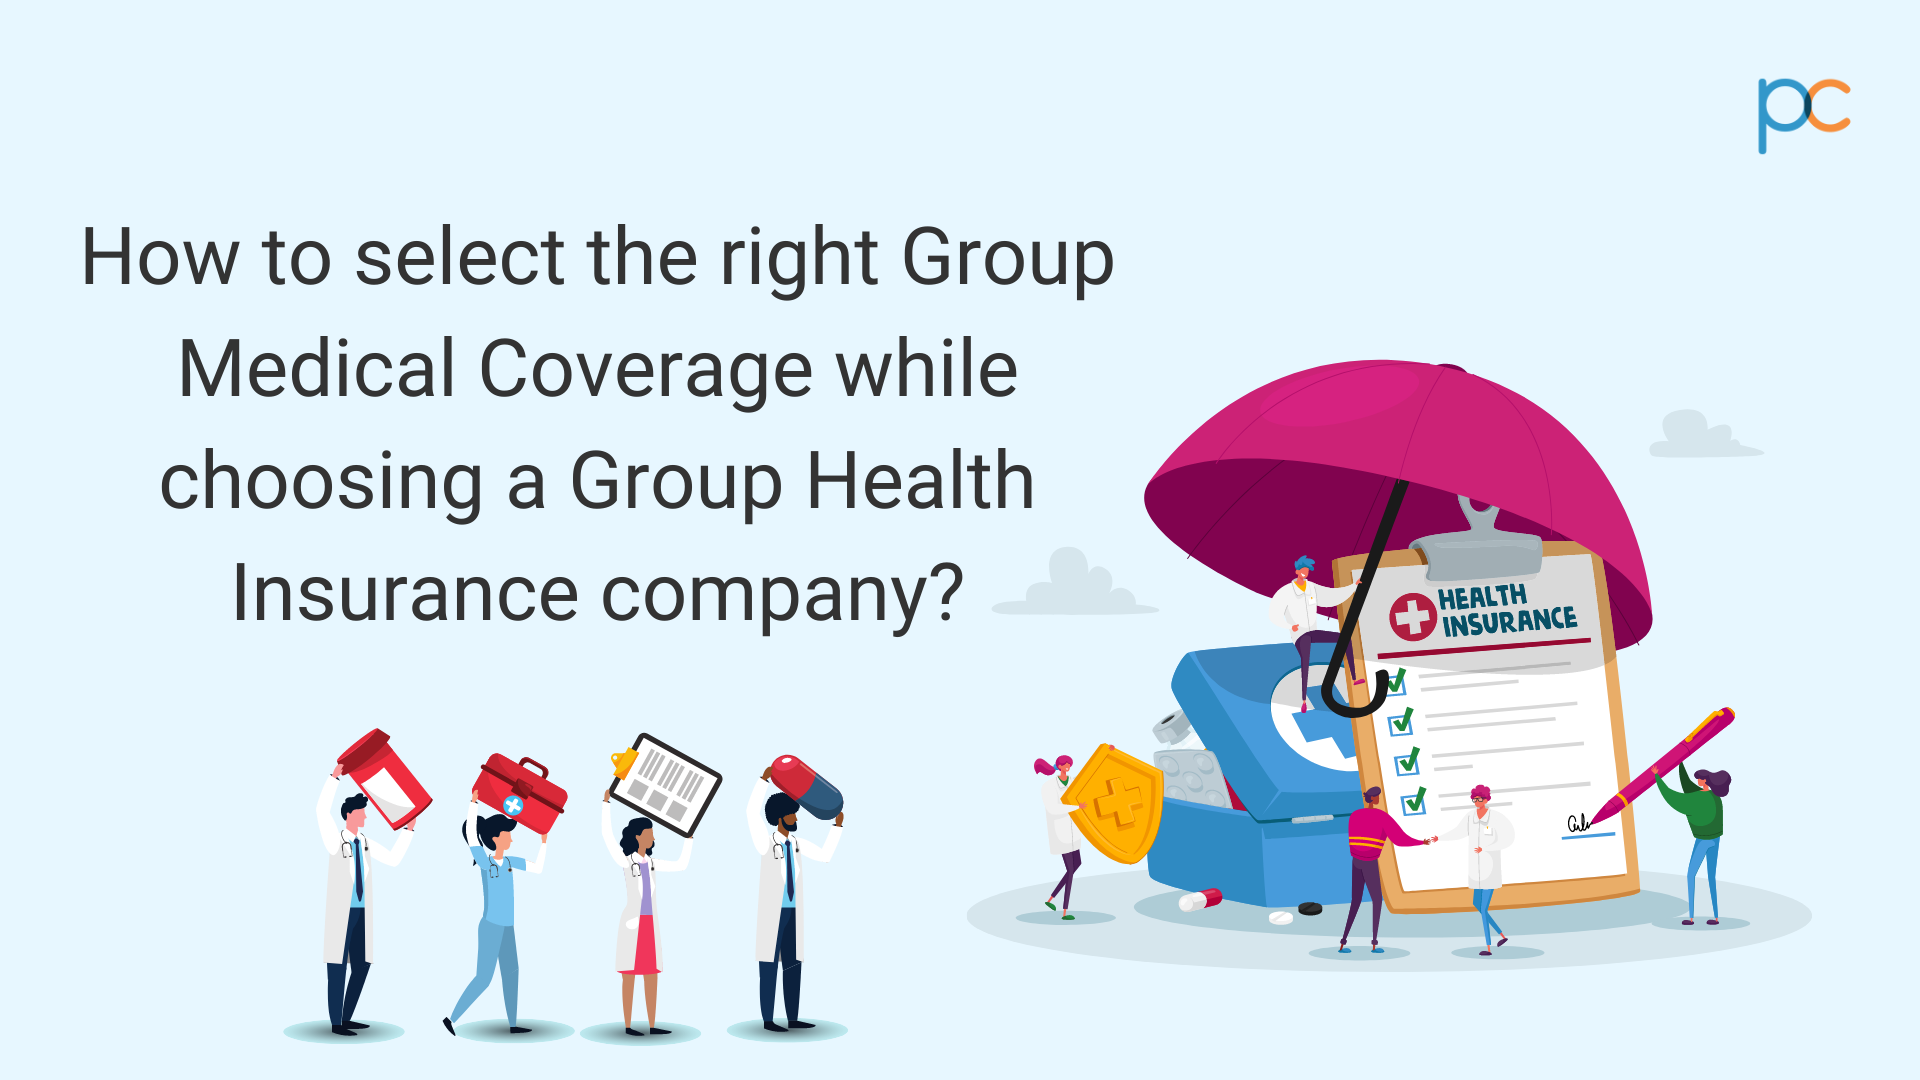 How to Select the Right Group Medical Coverage While Choosing a Group Health Insurance Company 1